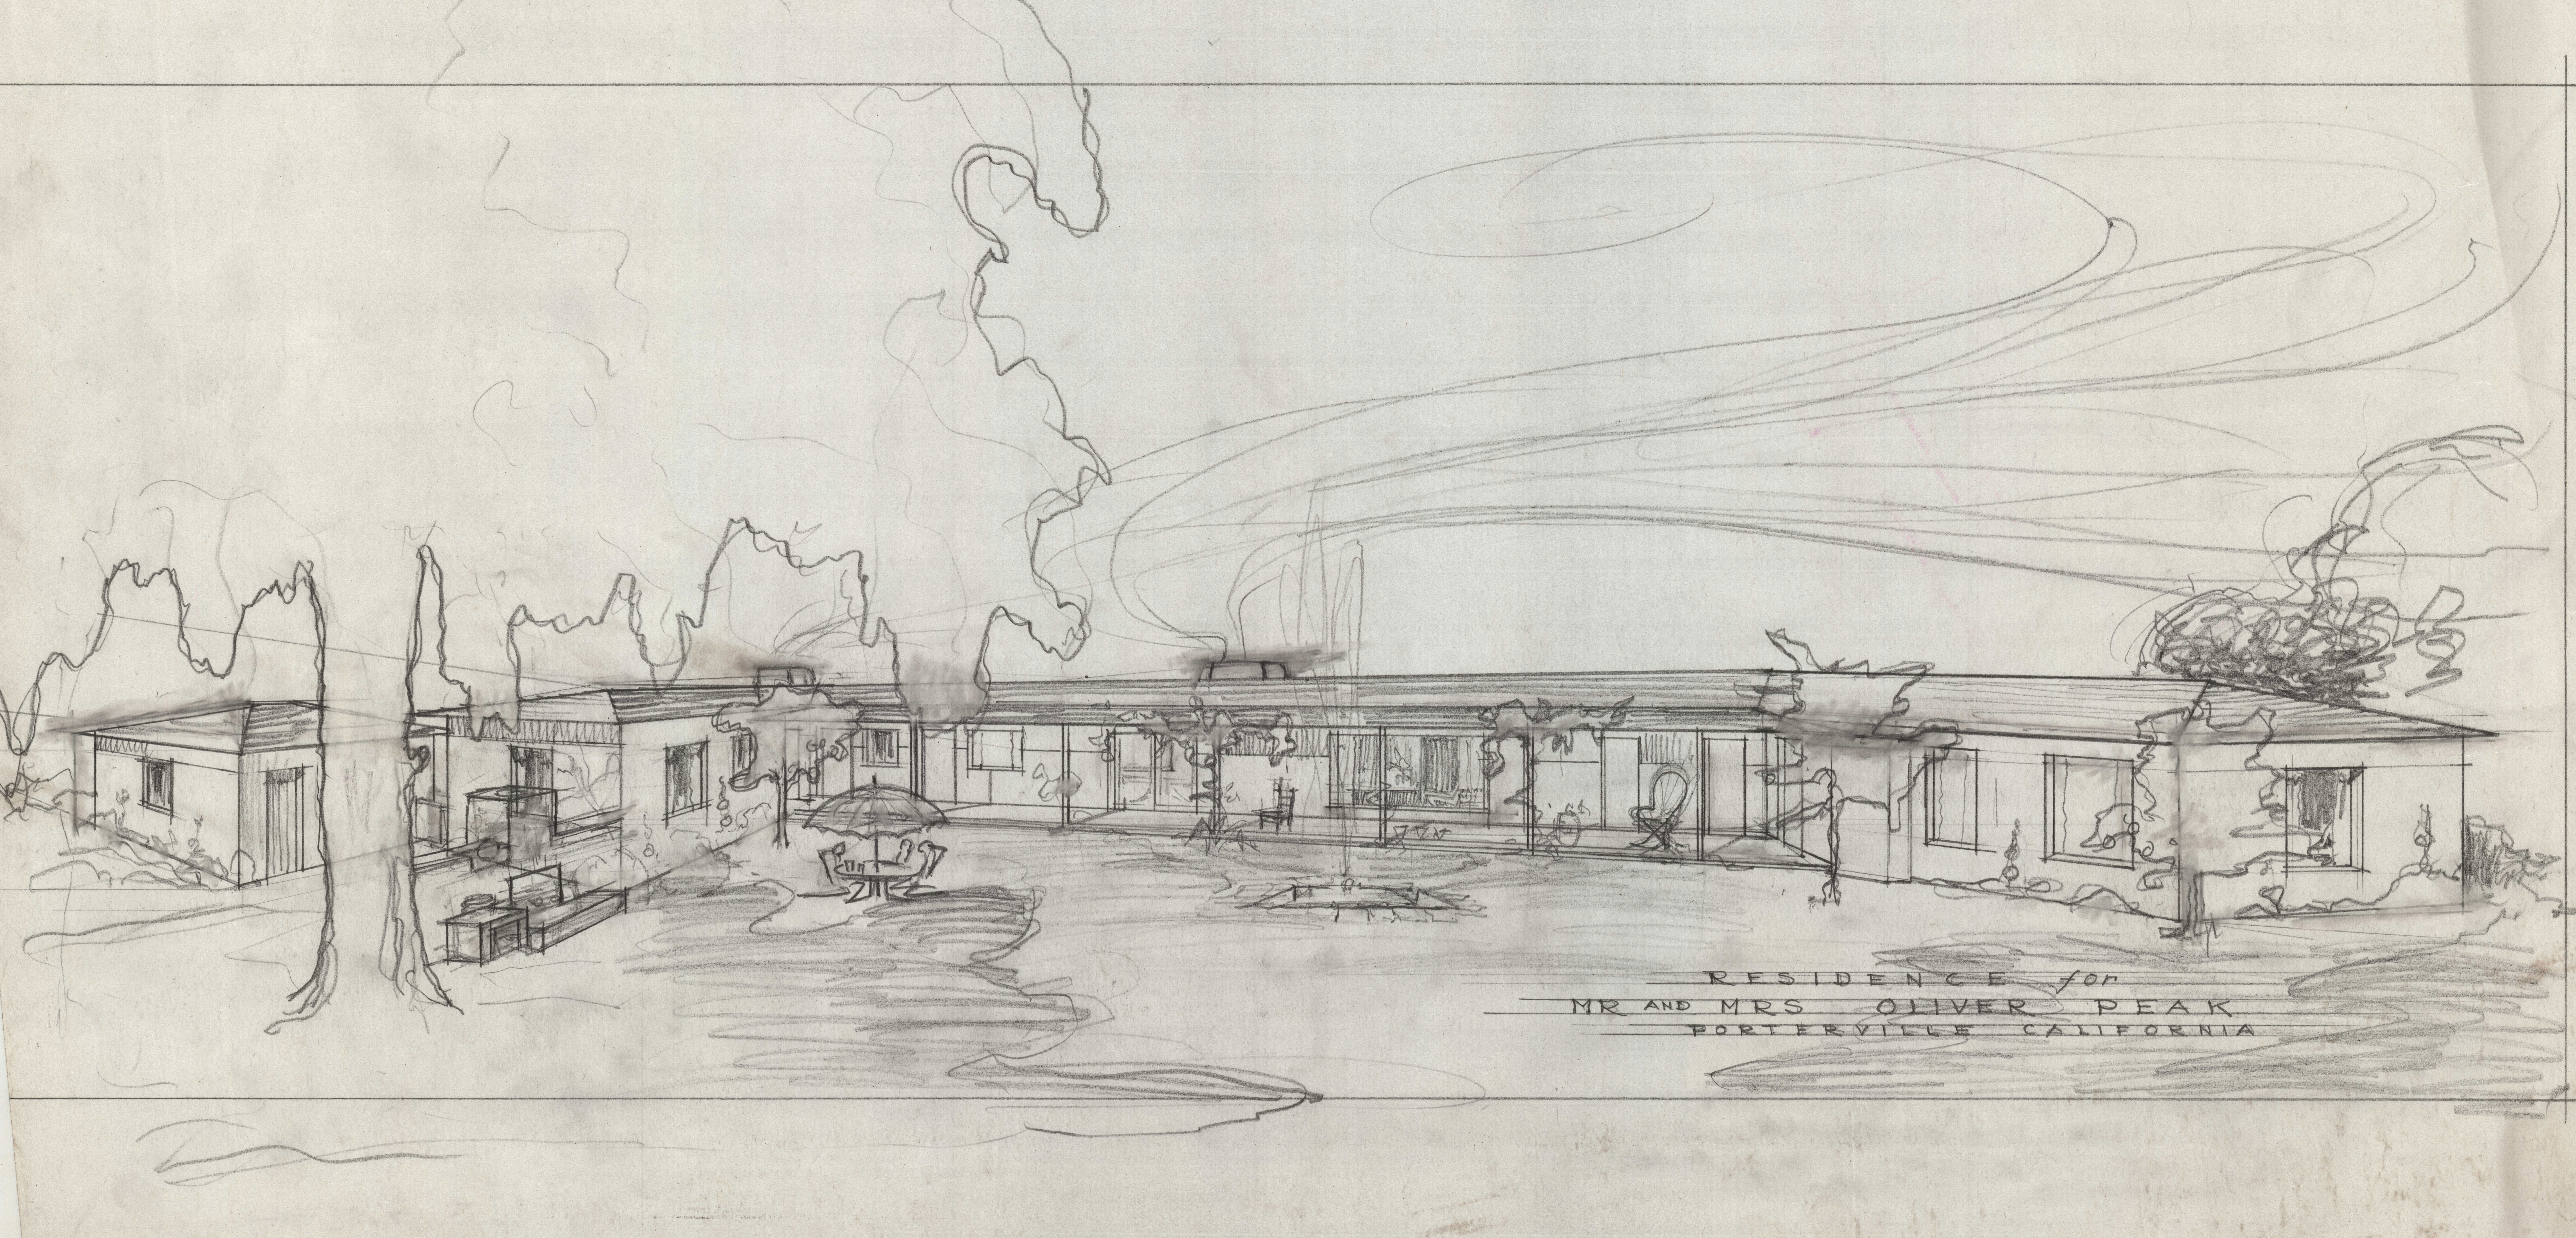 Architect's sketch of the Oliver Peak Residence